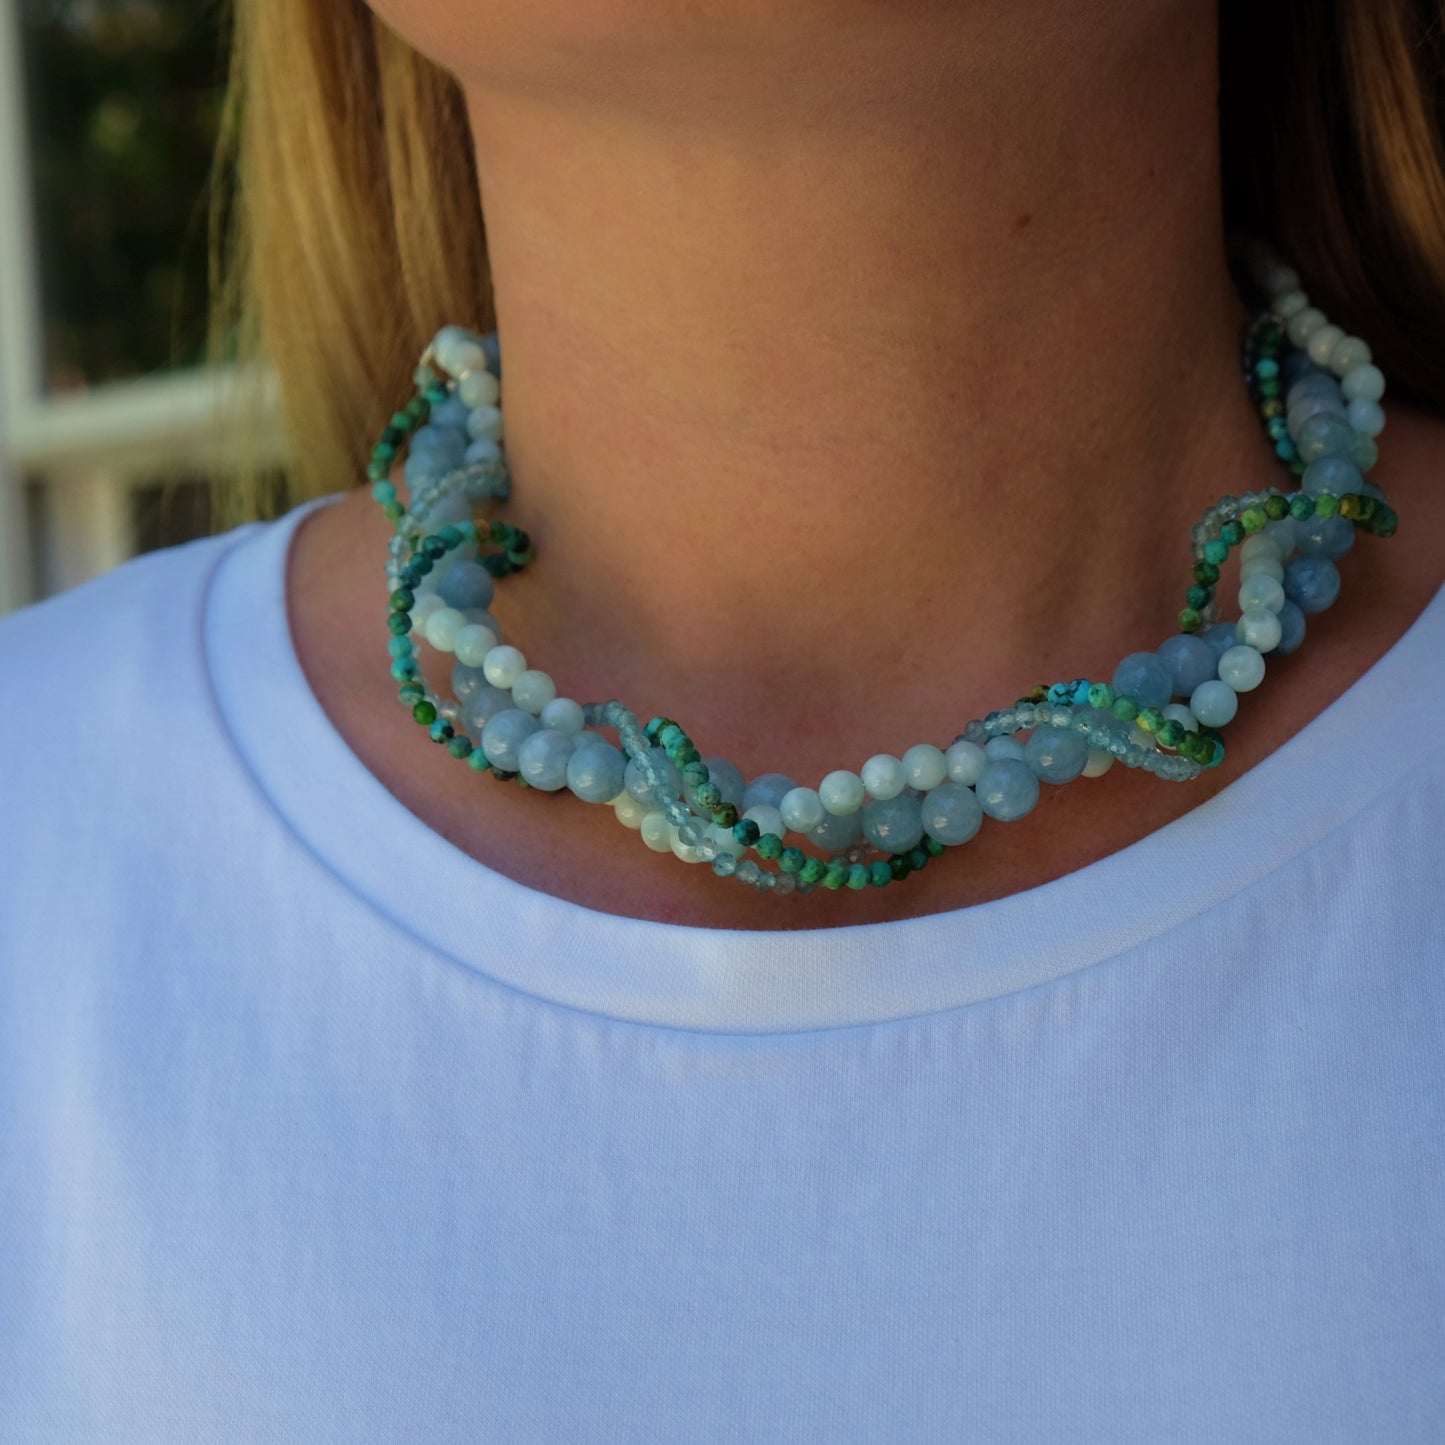 Moonstone, Aqua Stone and Turquoise Waive Necklace